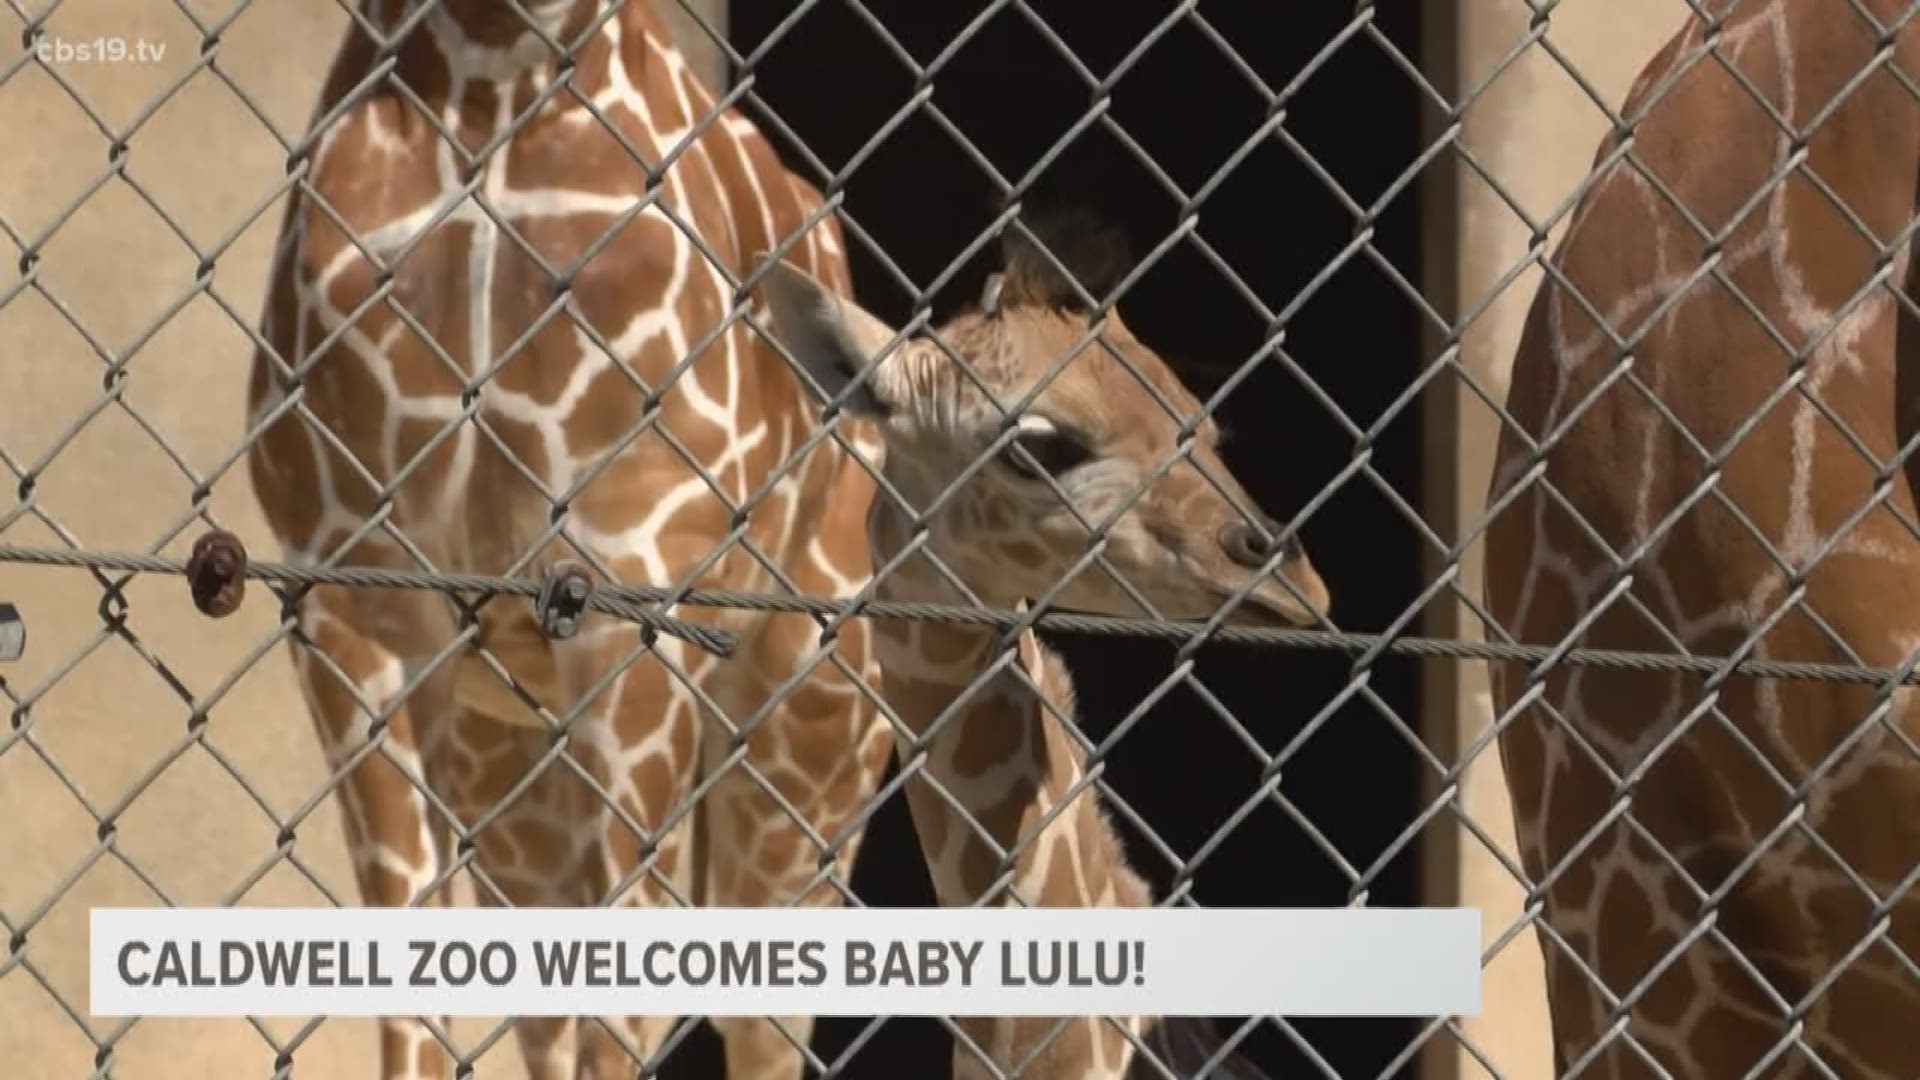 Tyler's Caldwell Zoo reveals their newest attraction, LuLu the baby giraffe. LuLu was born at the zoo on July 28th, but had been out of public view bonding with her mother until our cameras caught her first public appearance.